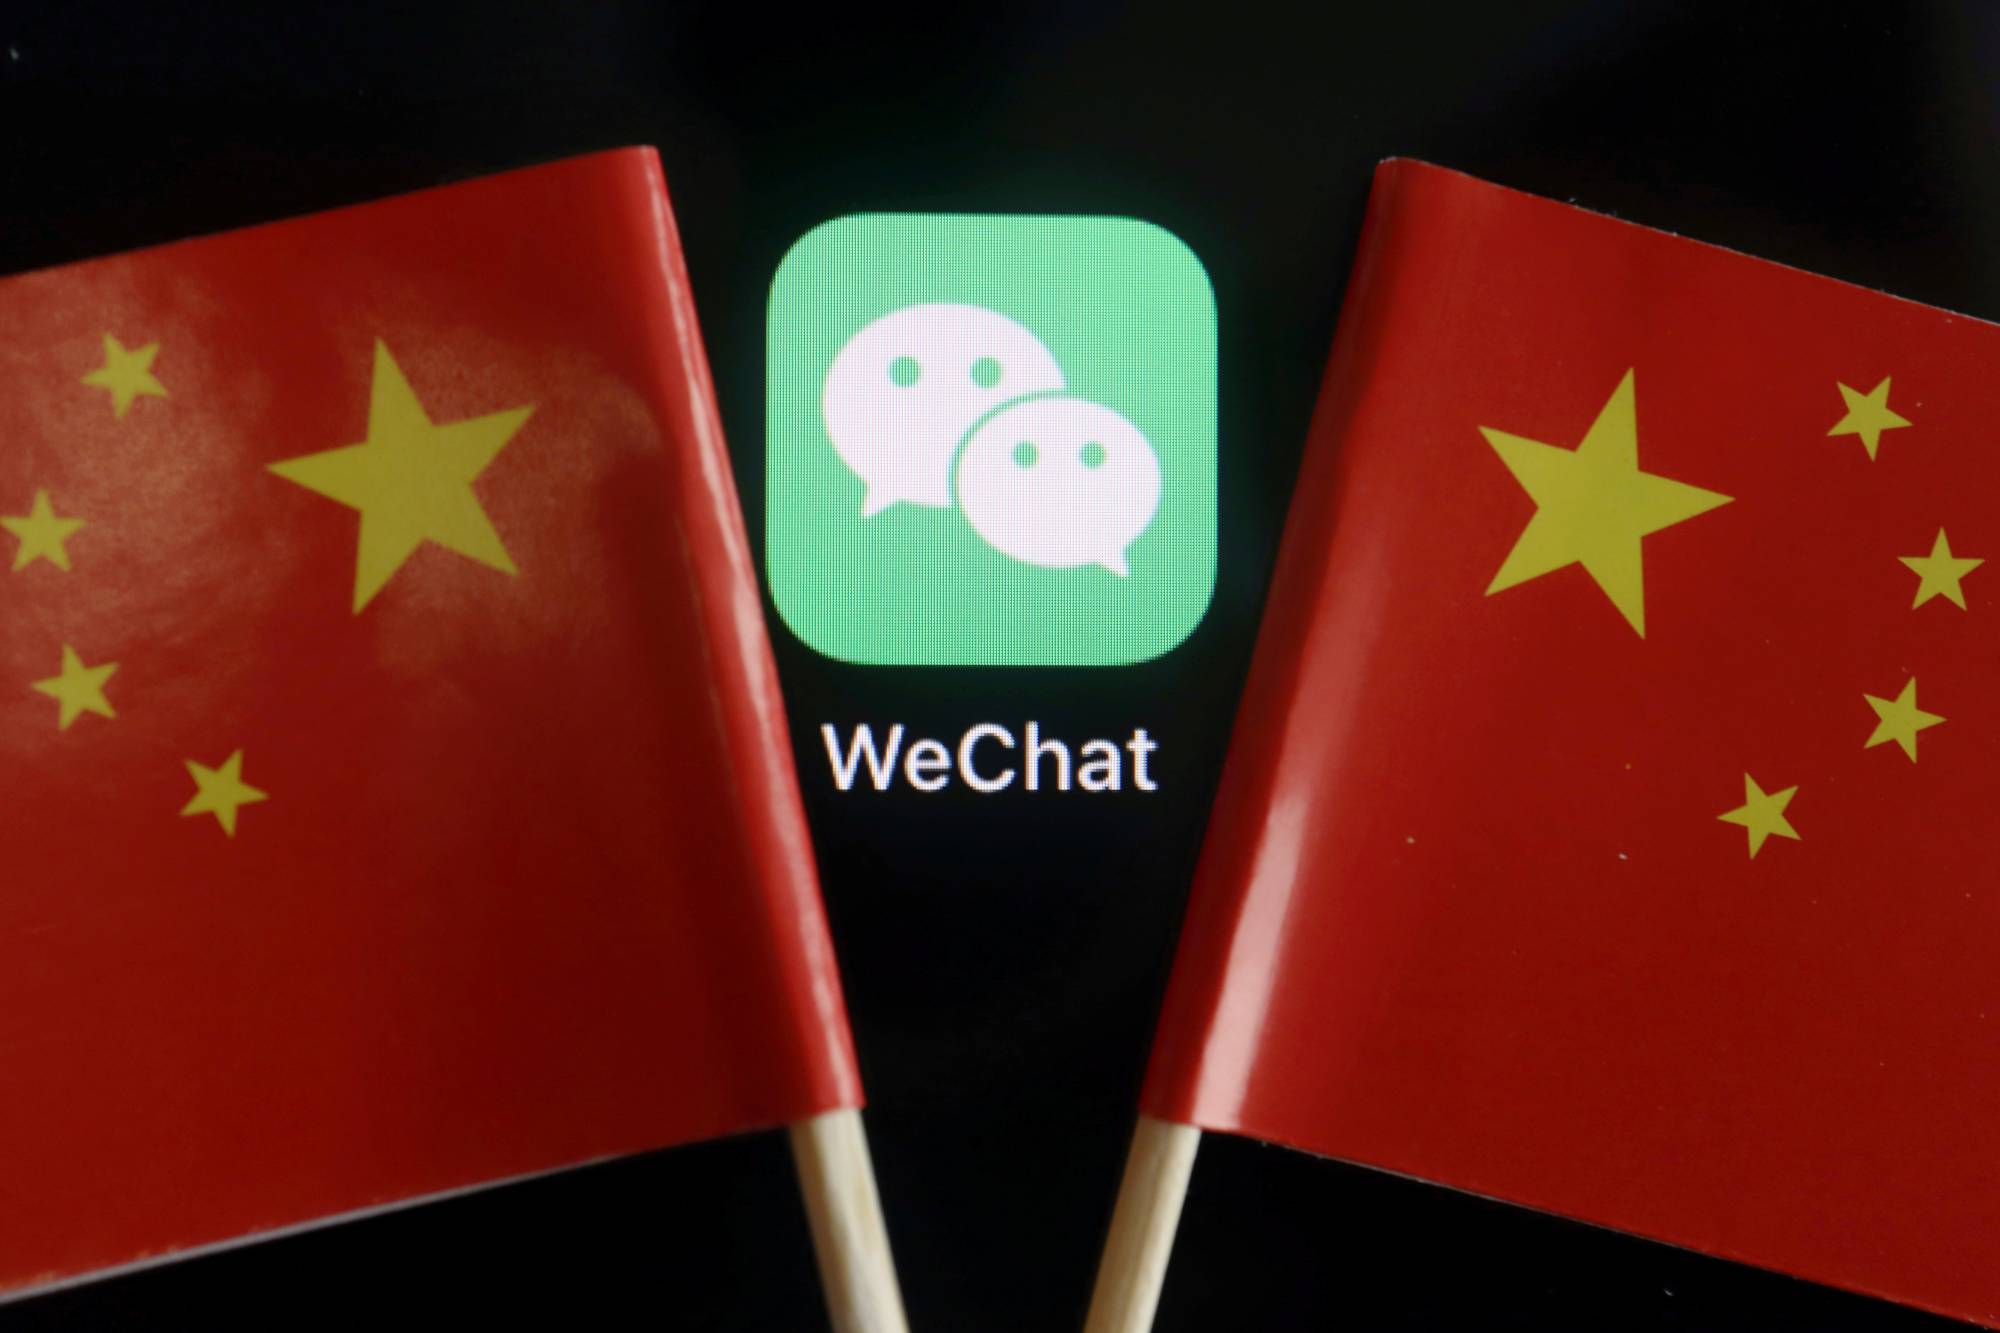 Much of the content censored on WeChat supports pro-democracy activists in Hong Kong. | REUTERS